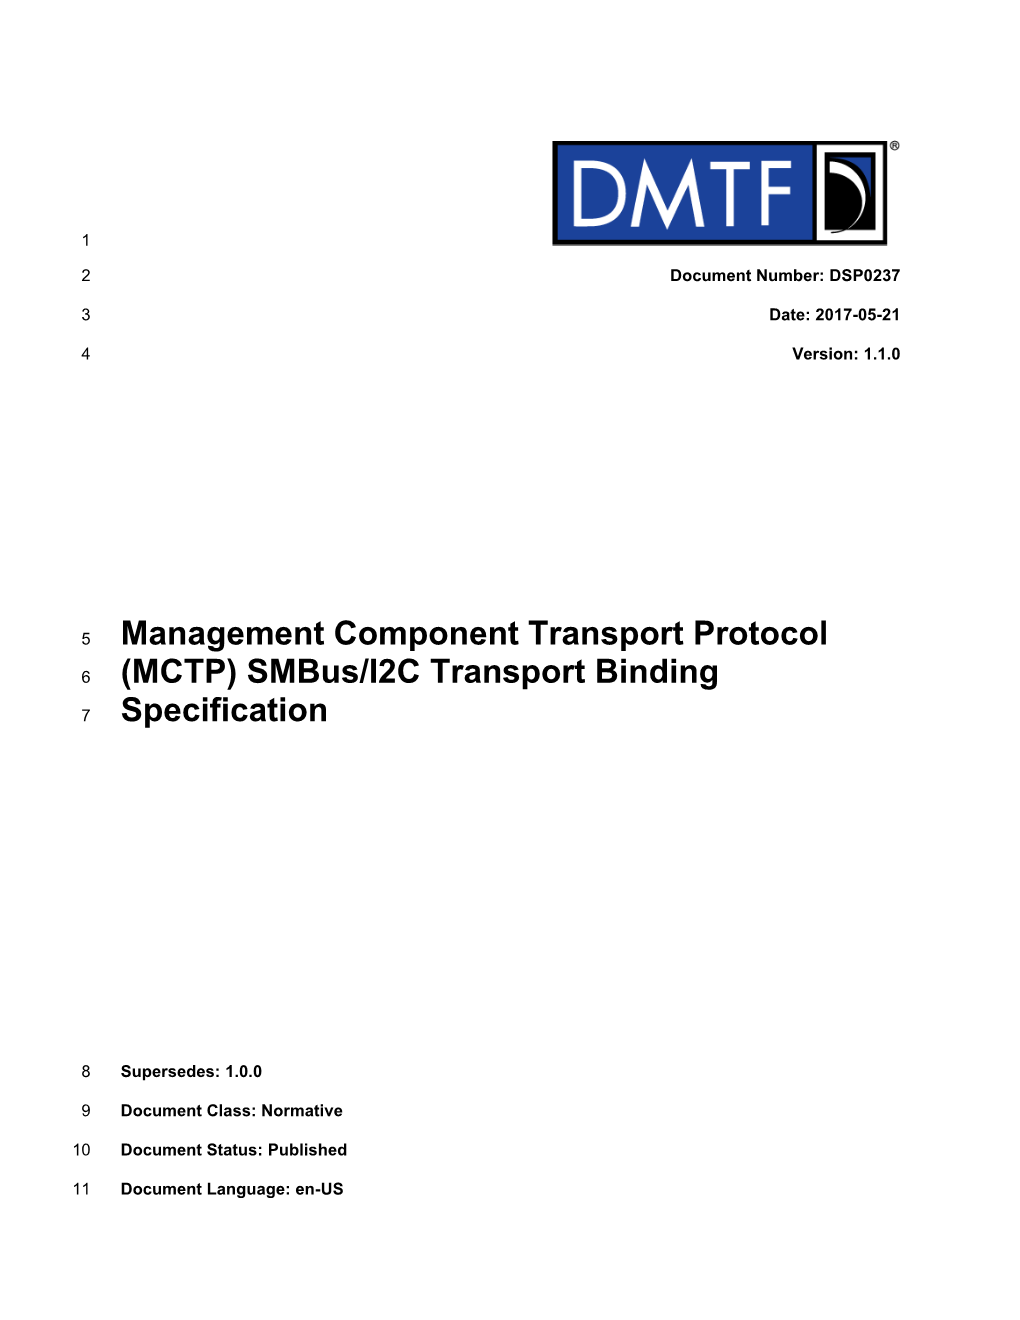 MCTP Smbus/I2C Transport Binding Specification DSP0237